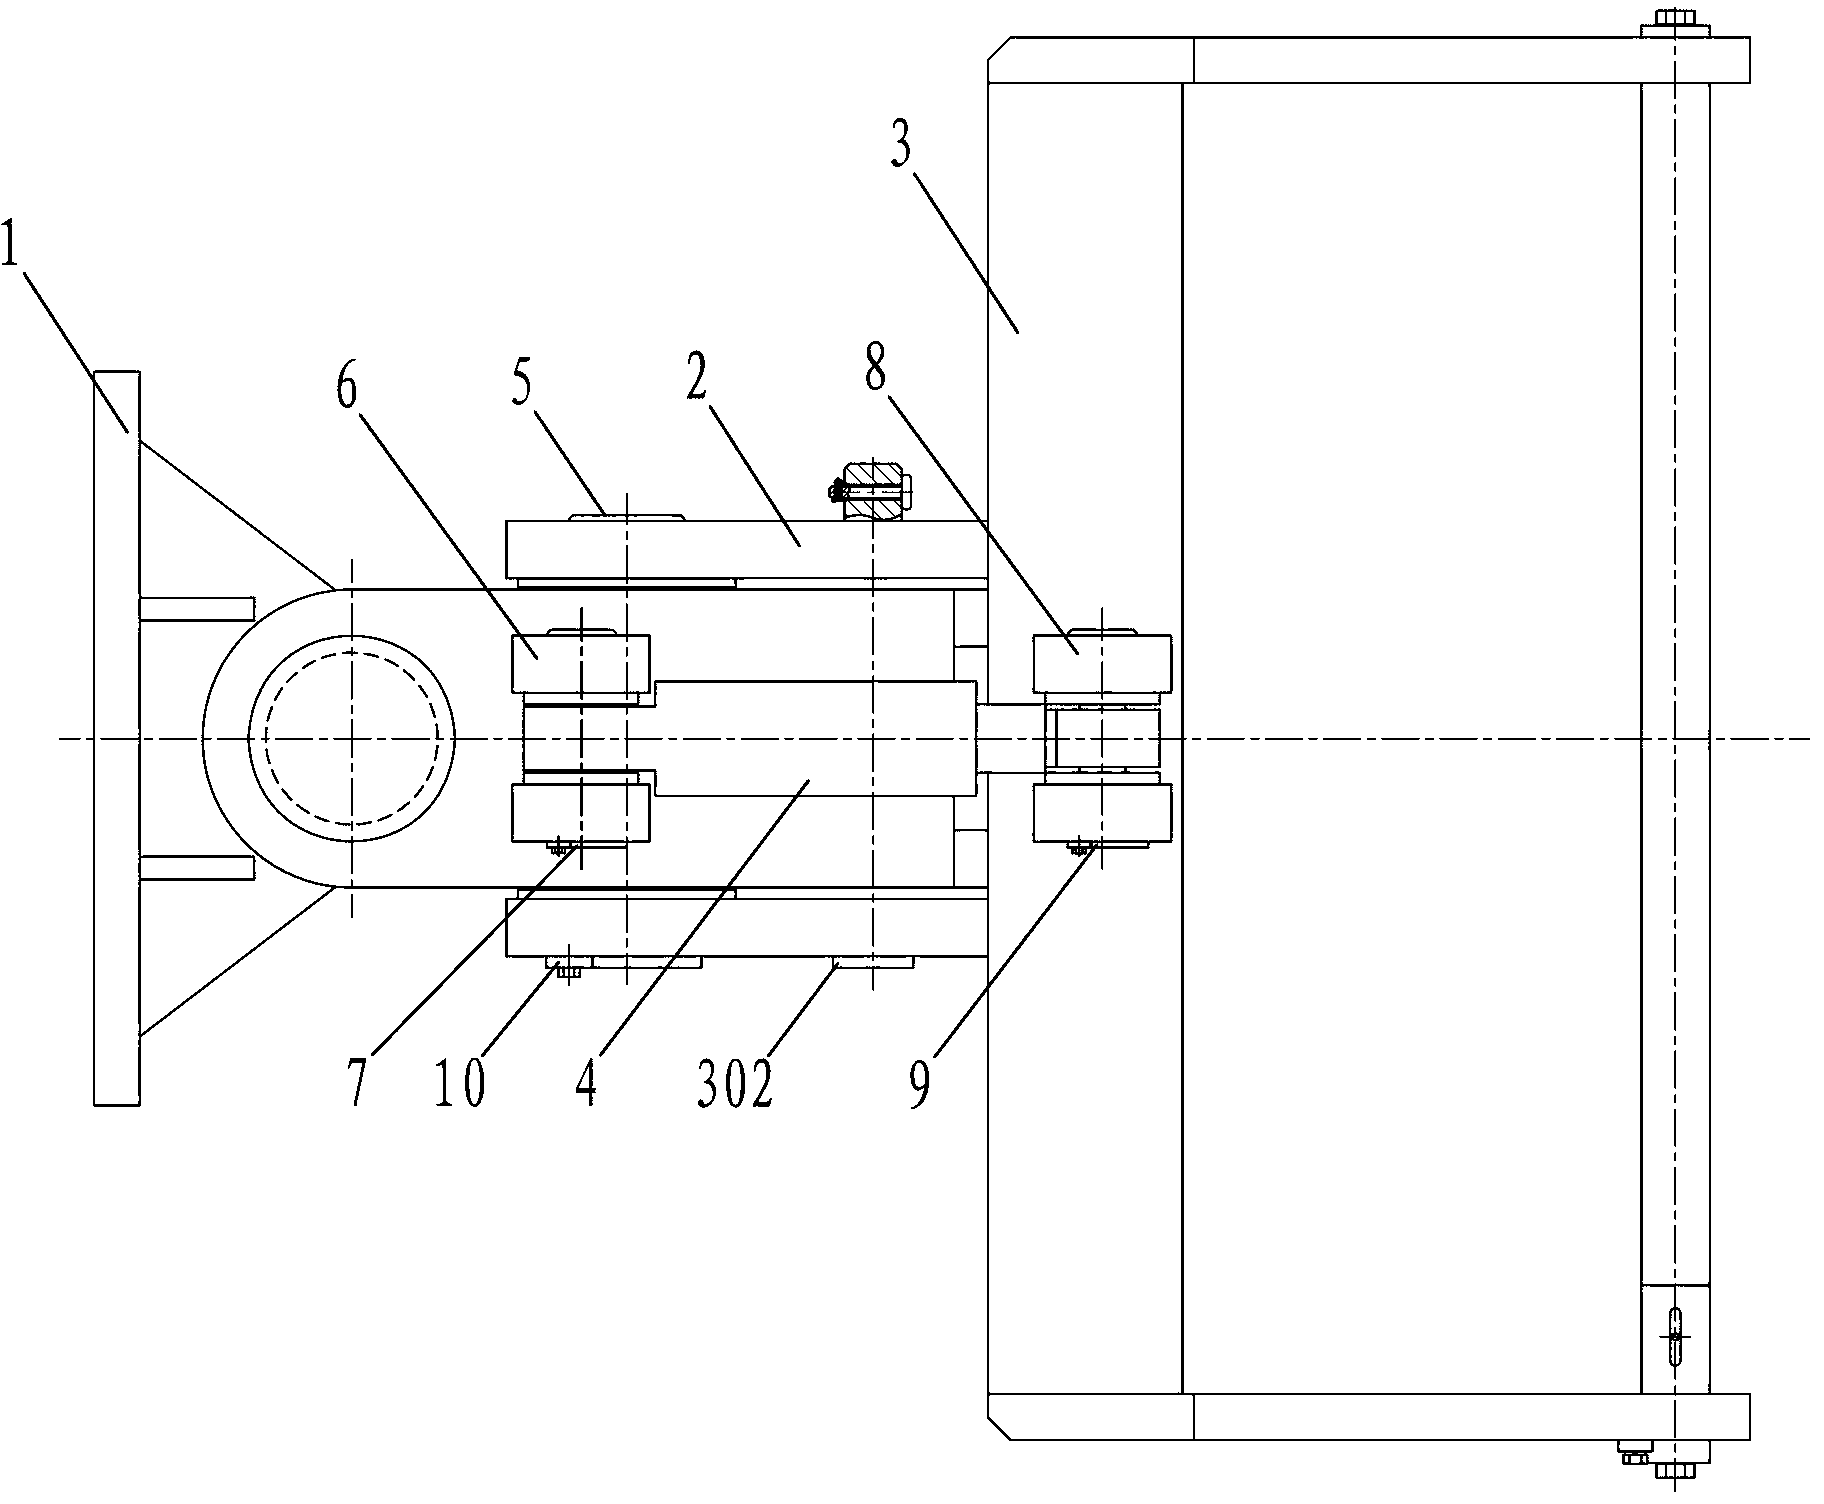 Pin shaft connection frame